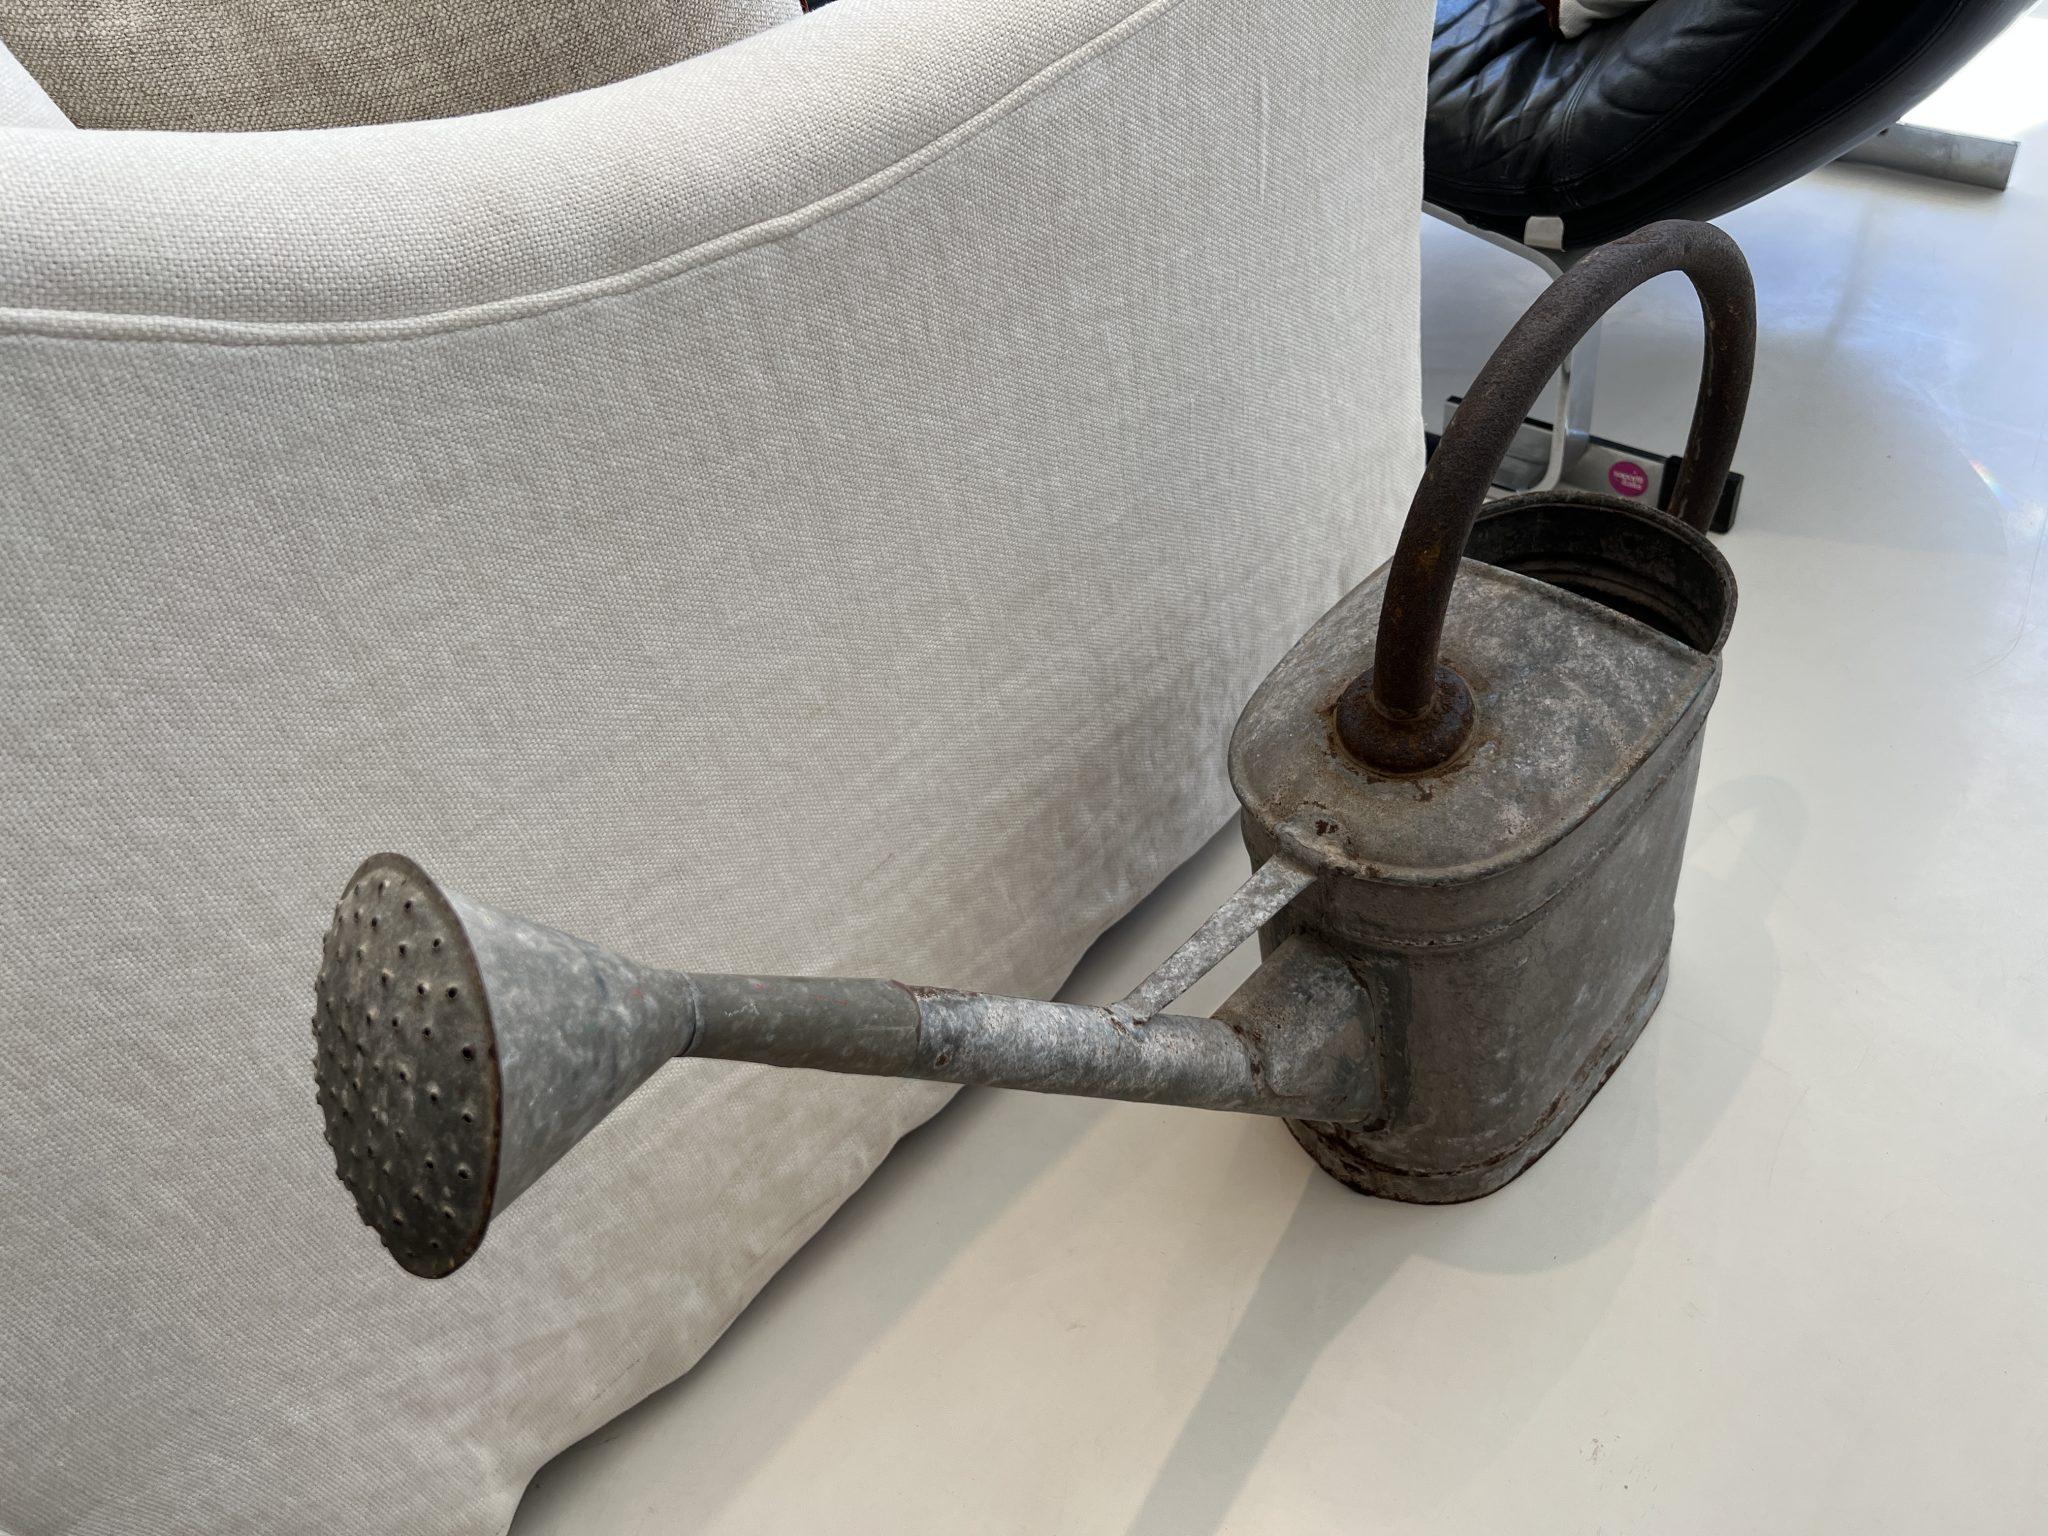 Charming rustic watering can with long spout.